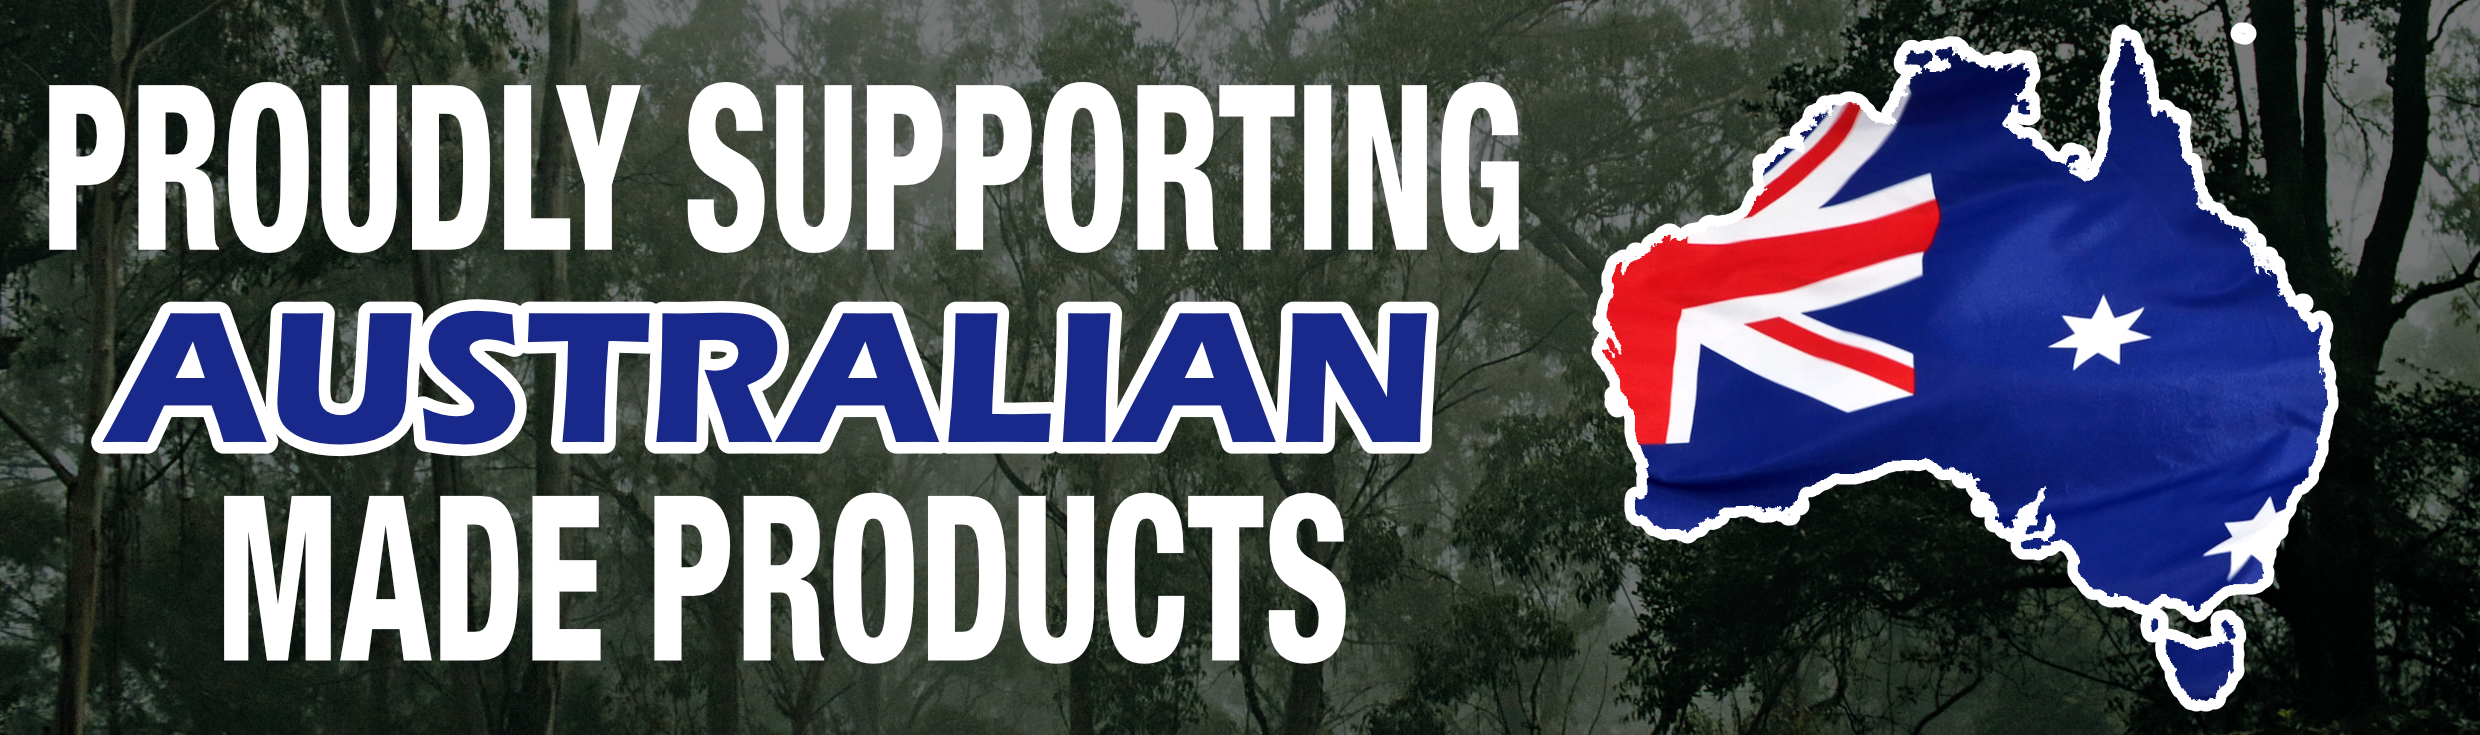 PROUDLY SUPPORTING AUSTRALIAN MADE PRODUCTS